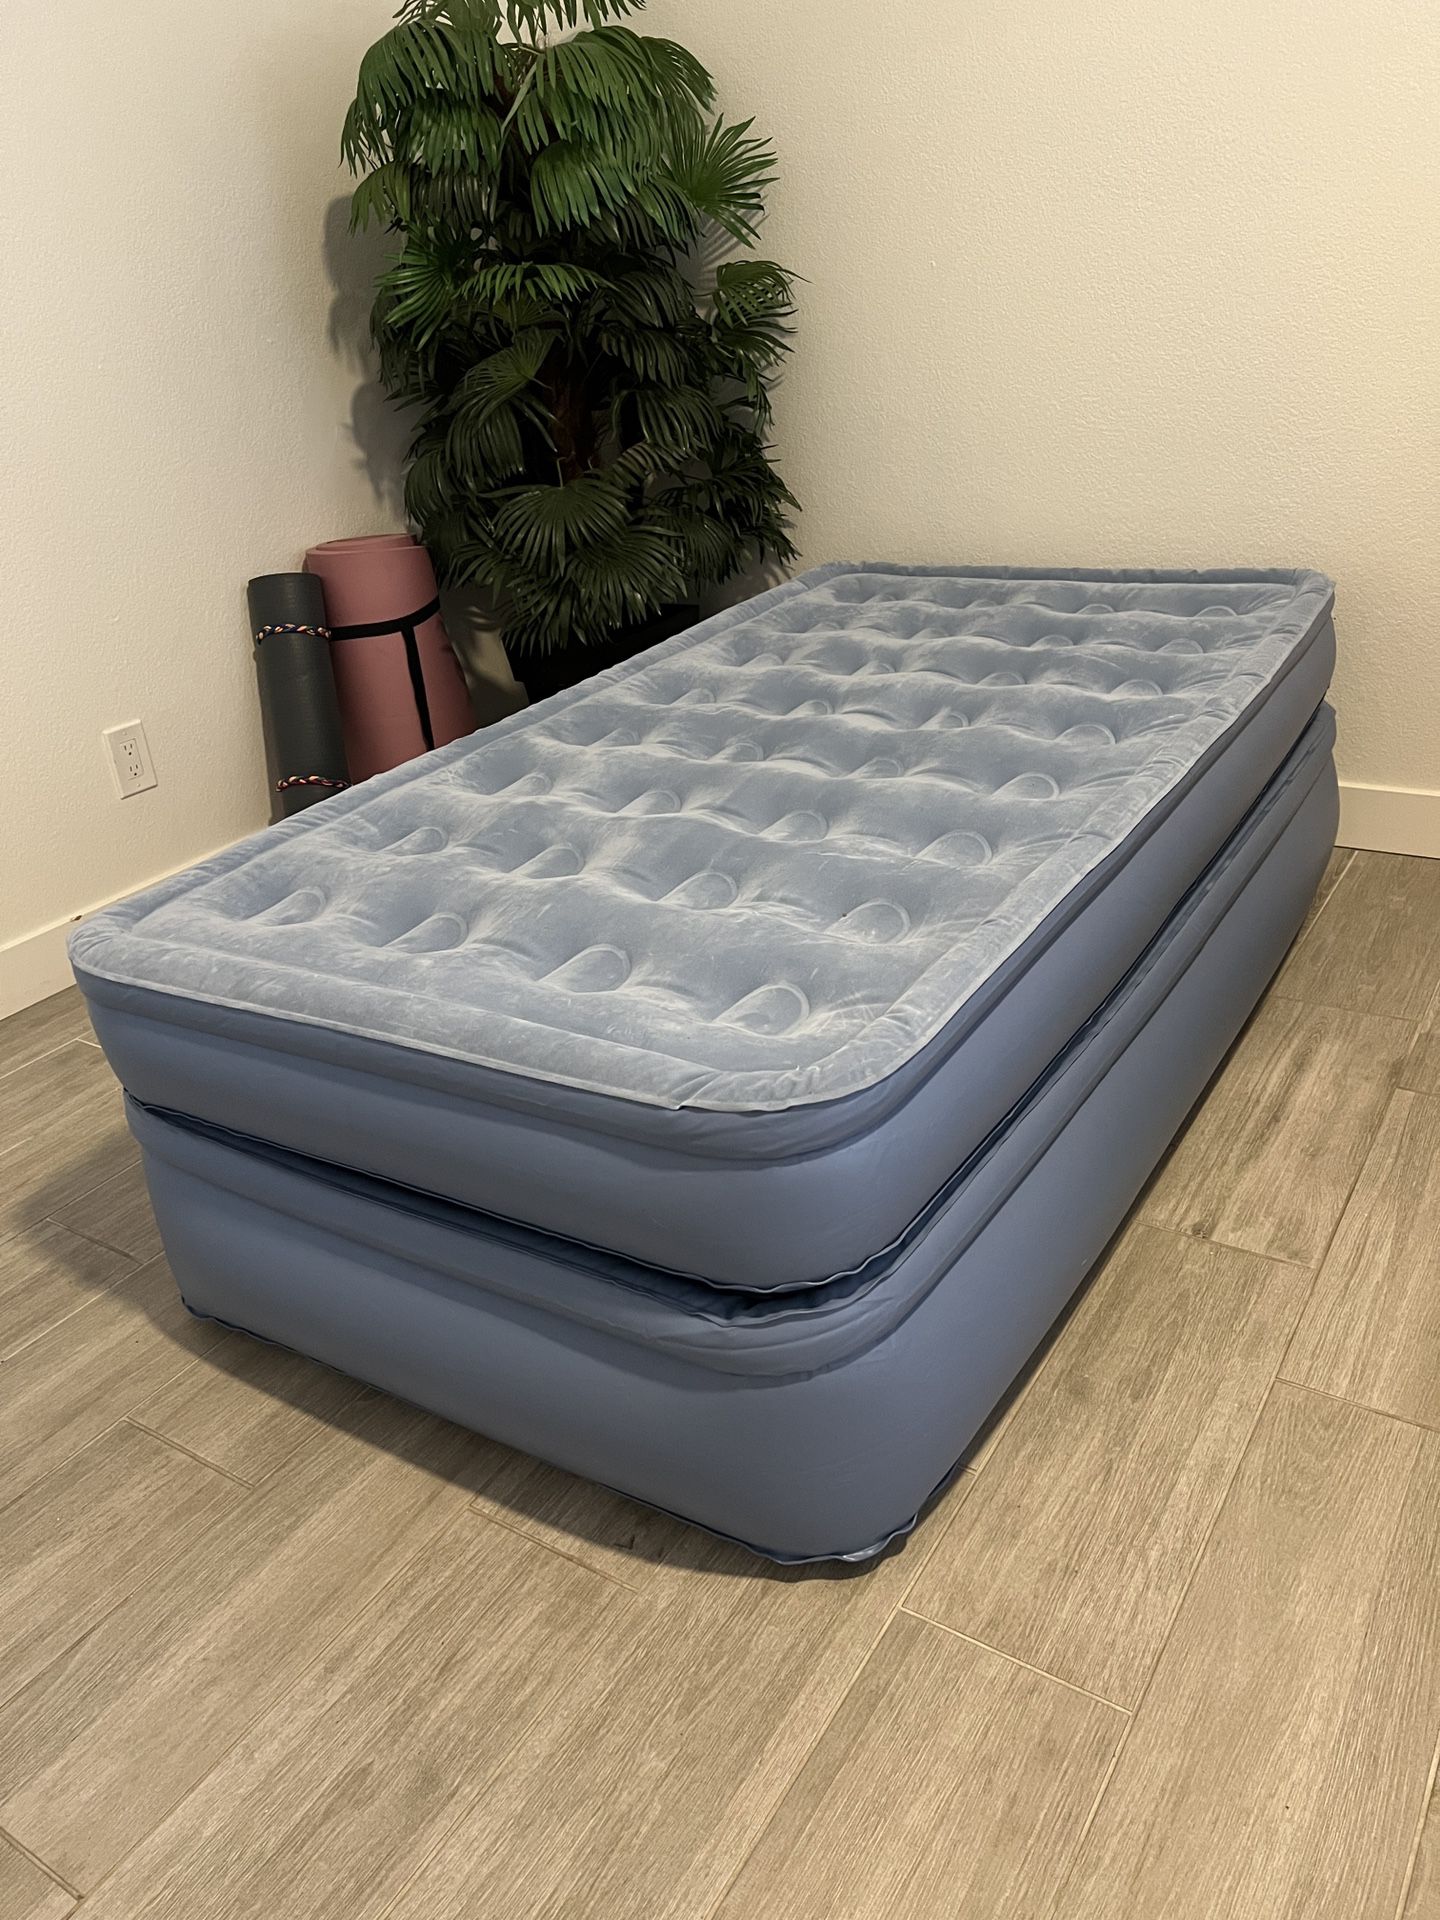 Twin Aerobed Inflatable Mattress. Like New. Double High, No Leaks, Used Once Or Twice. 